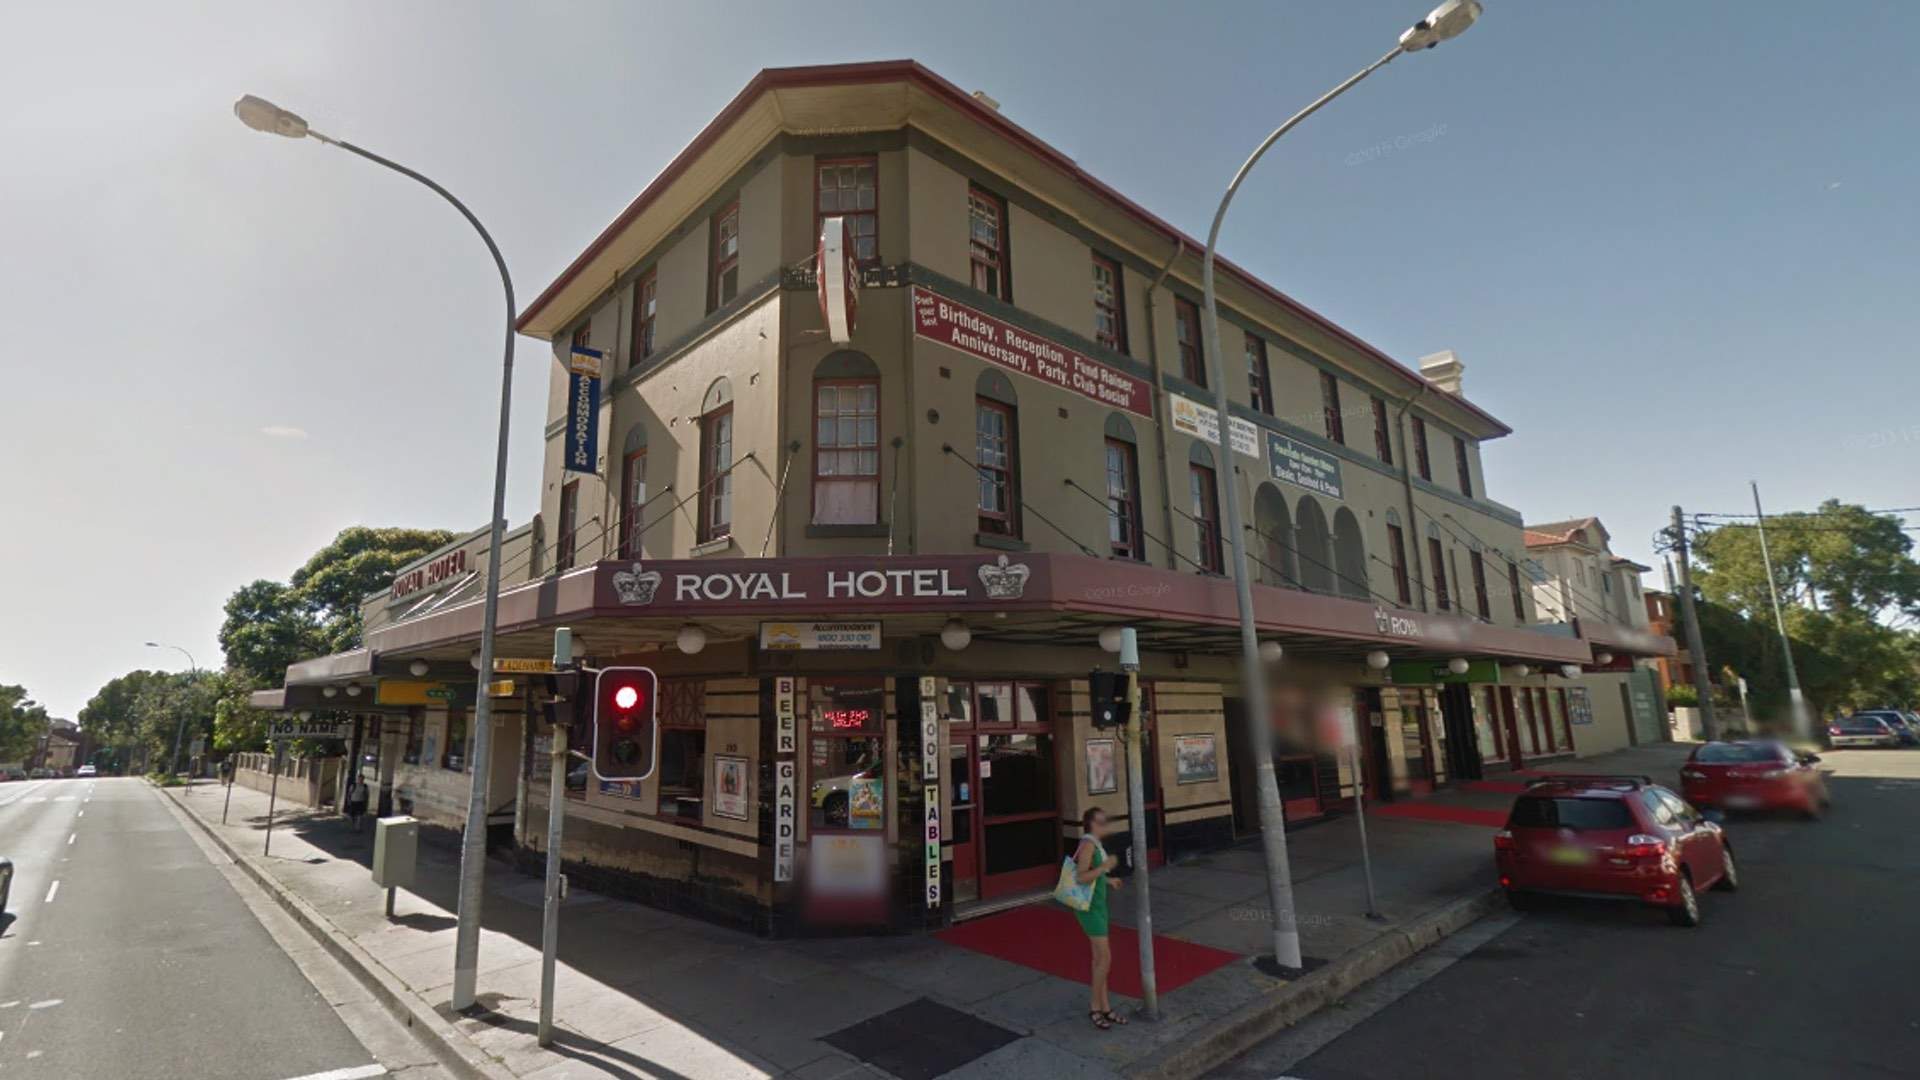 The Royal Hotel Bondi Is the Latest Sydney Pub to Be Acquired by Merivale